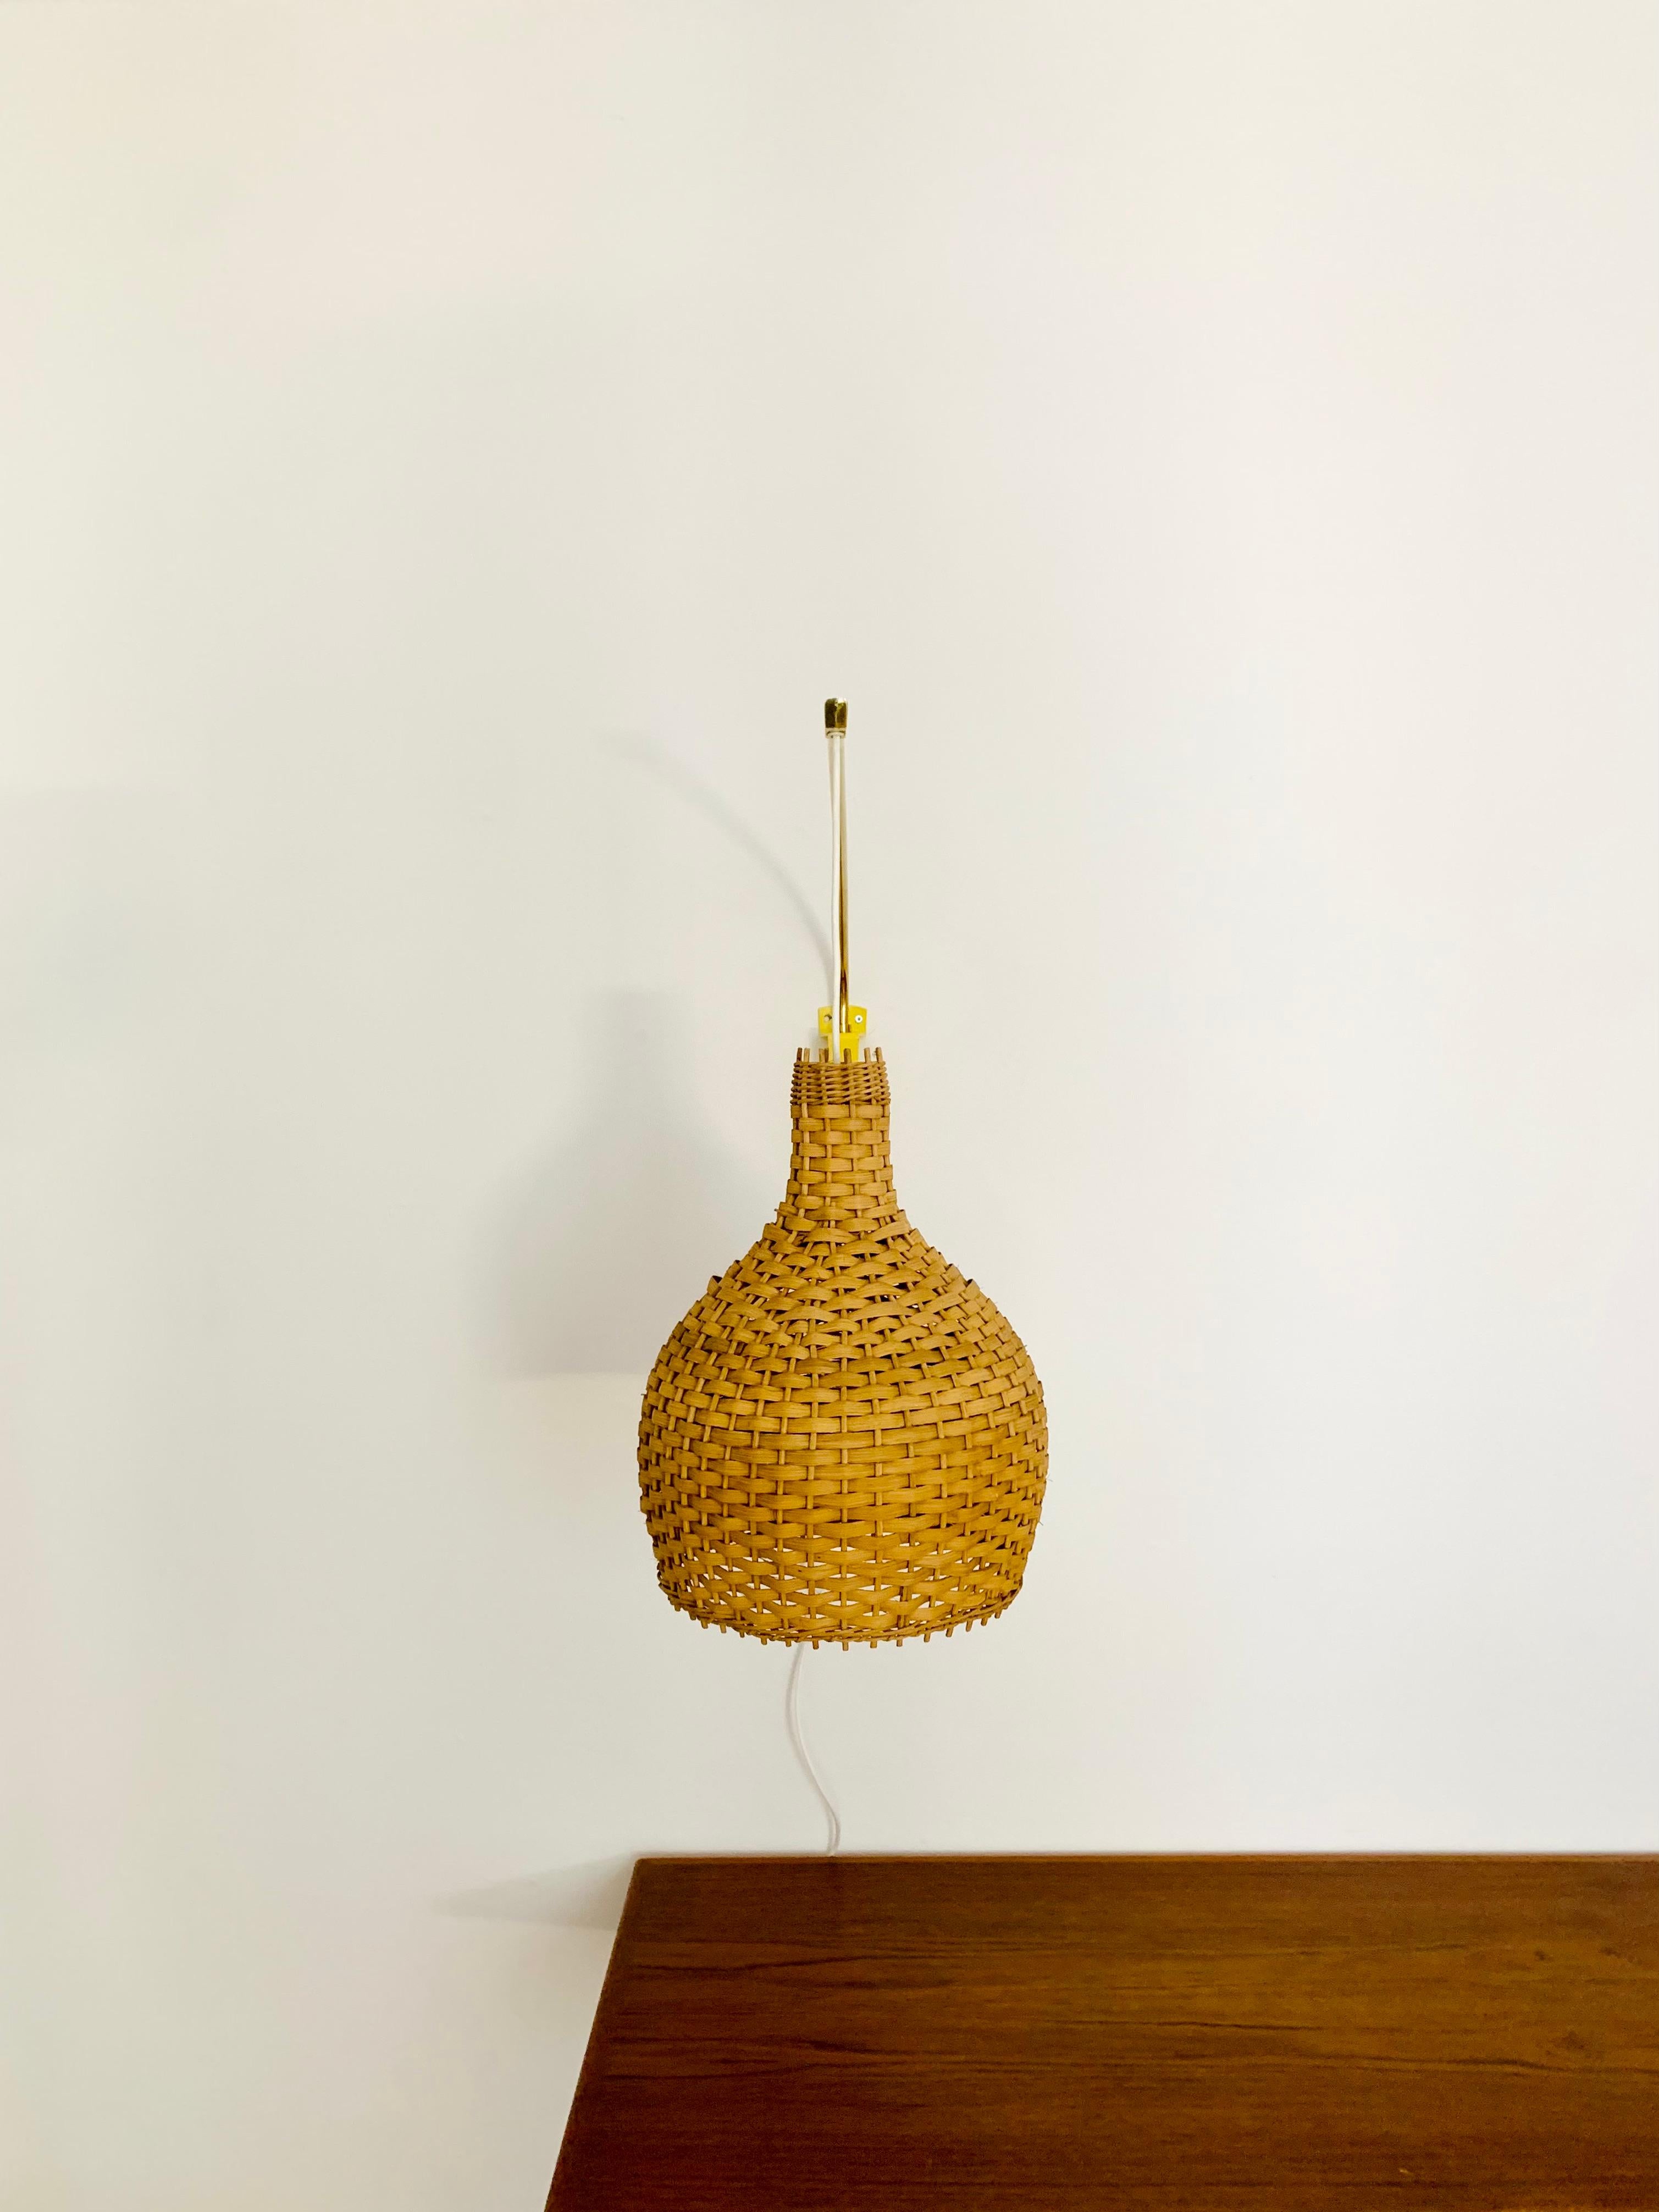 Adjustable Brass and Wicker Arc Sconce In Good Condition For Sale In München, DE